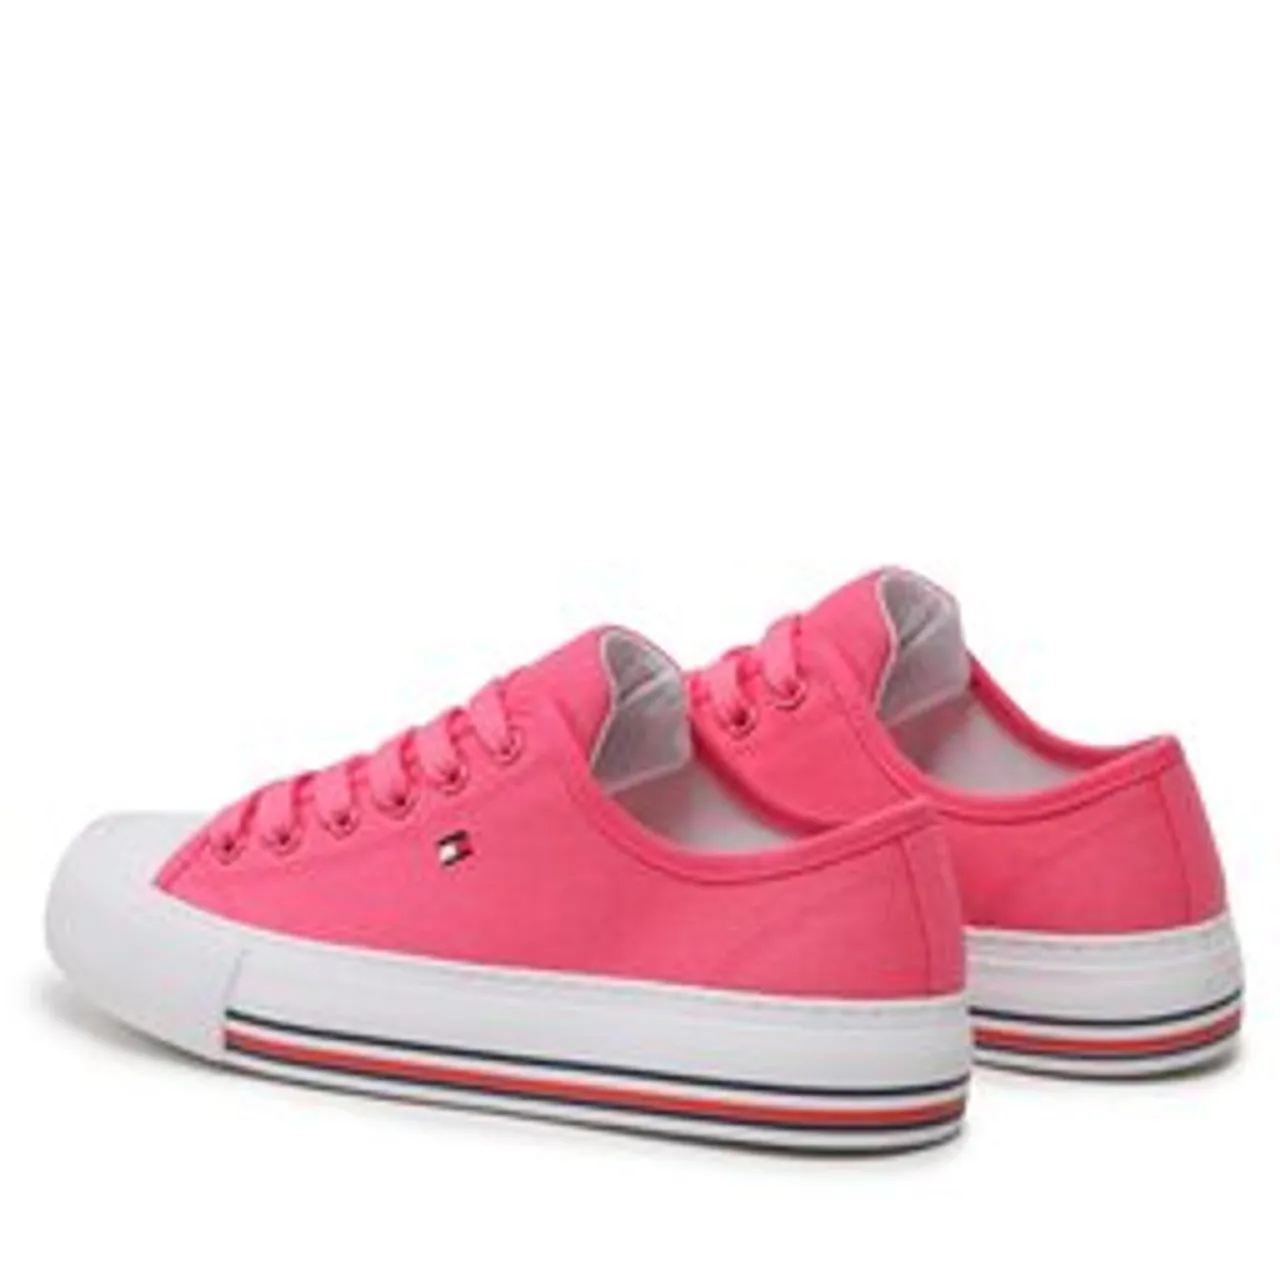 Sneakers aus Stoff Tommy Hilfiger Low Cut Lace-Up T3A9-32677-0890313 S Fuchsia 313